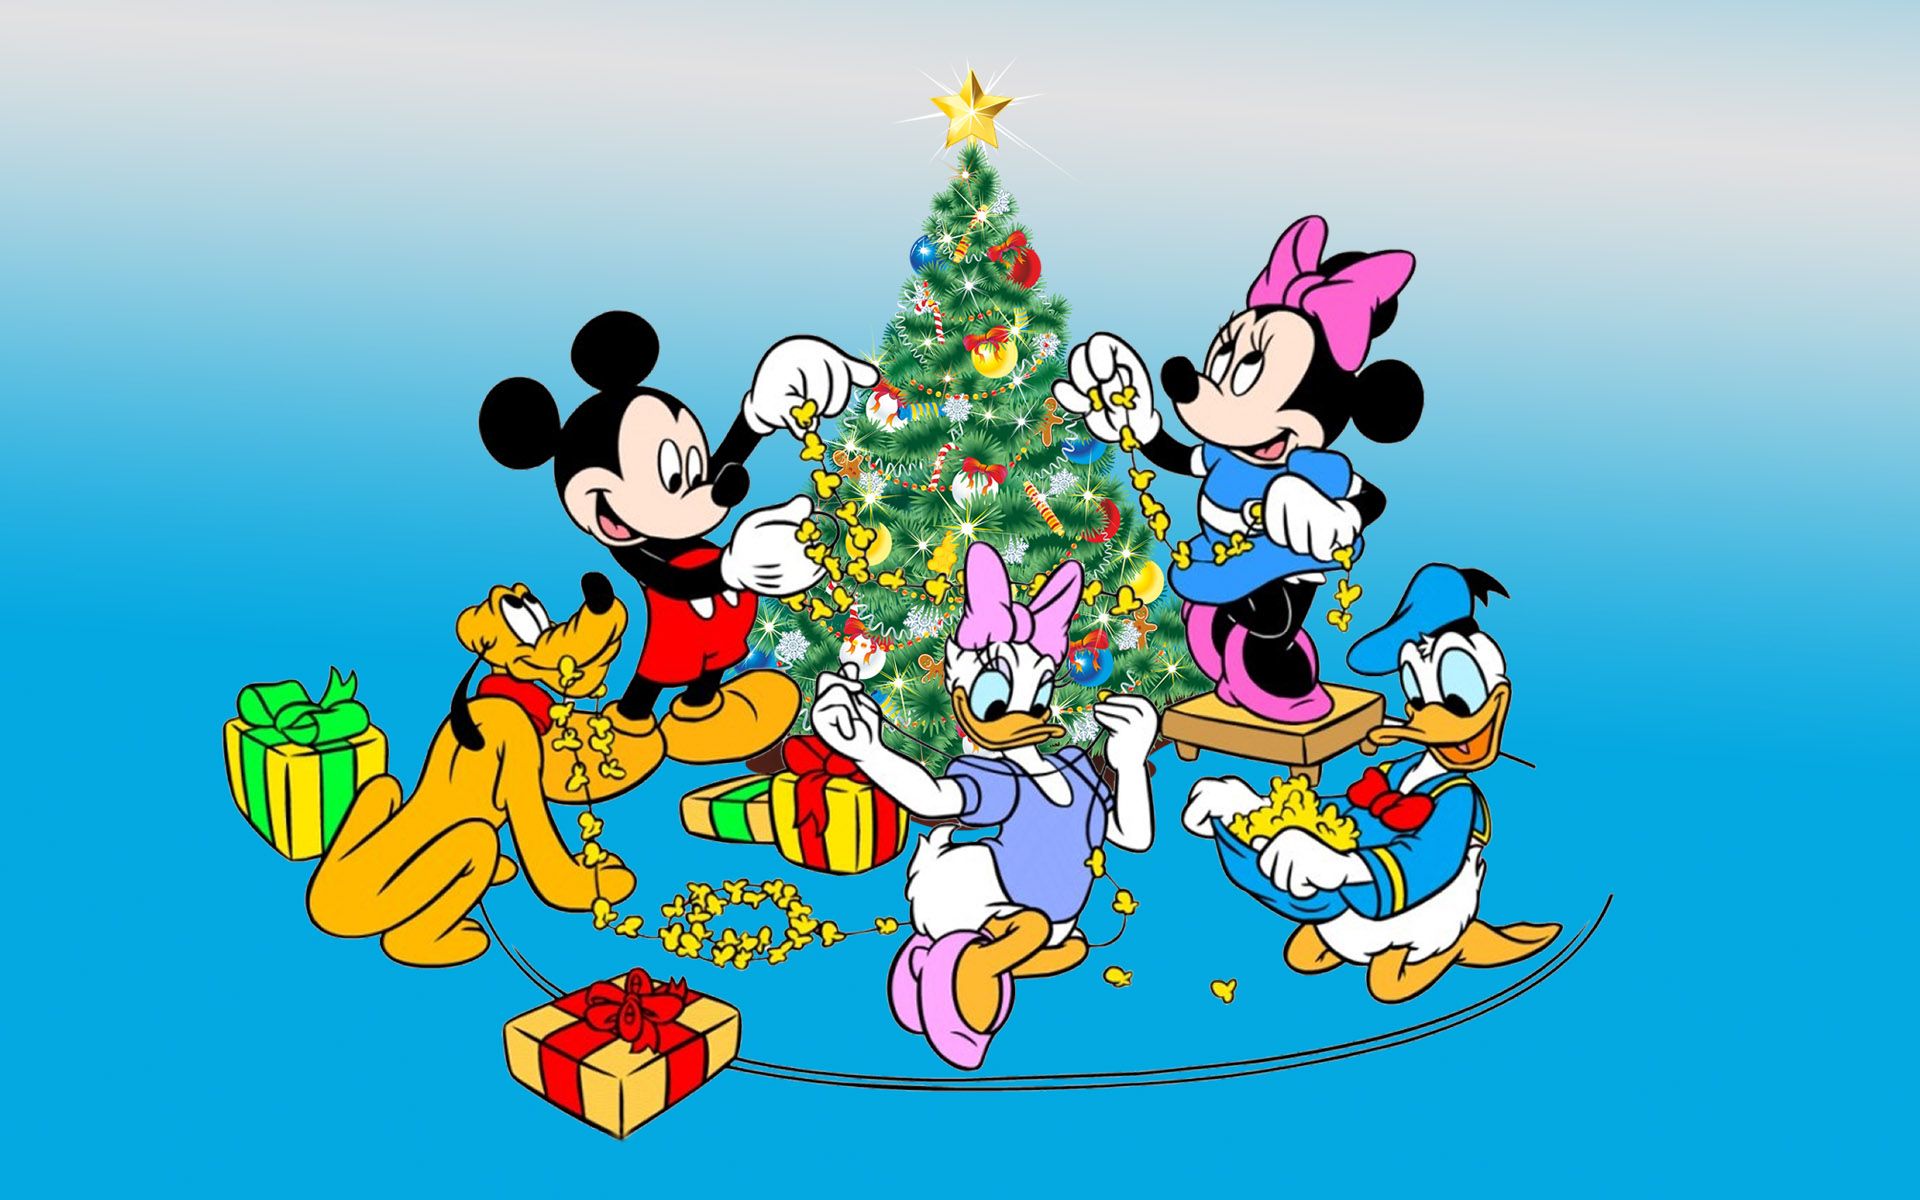 Mickey And Minnie Mouse Donald Duck And Pluto Decorating